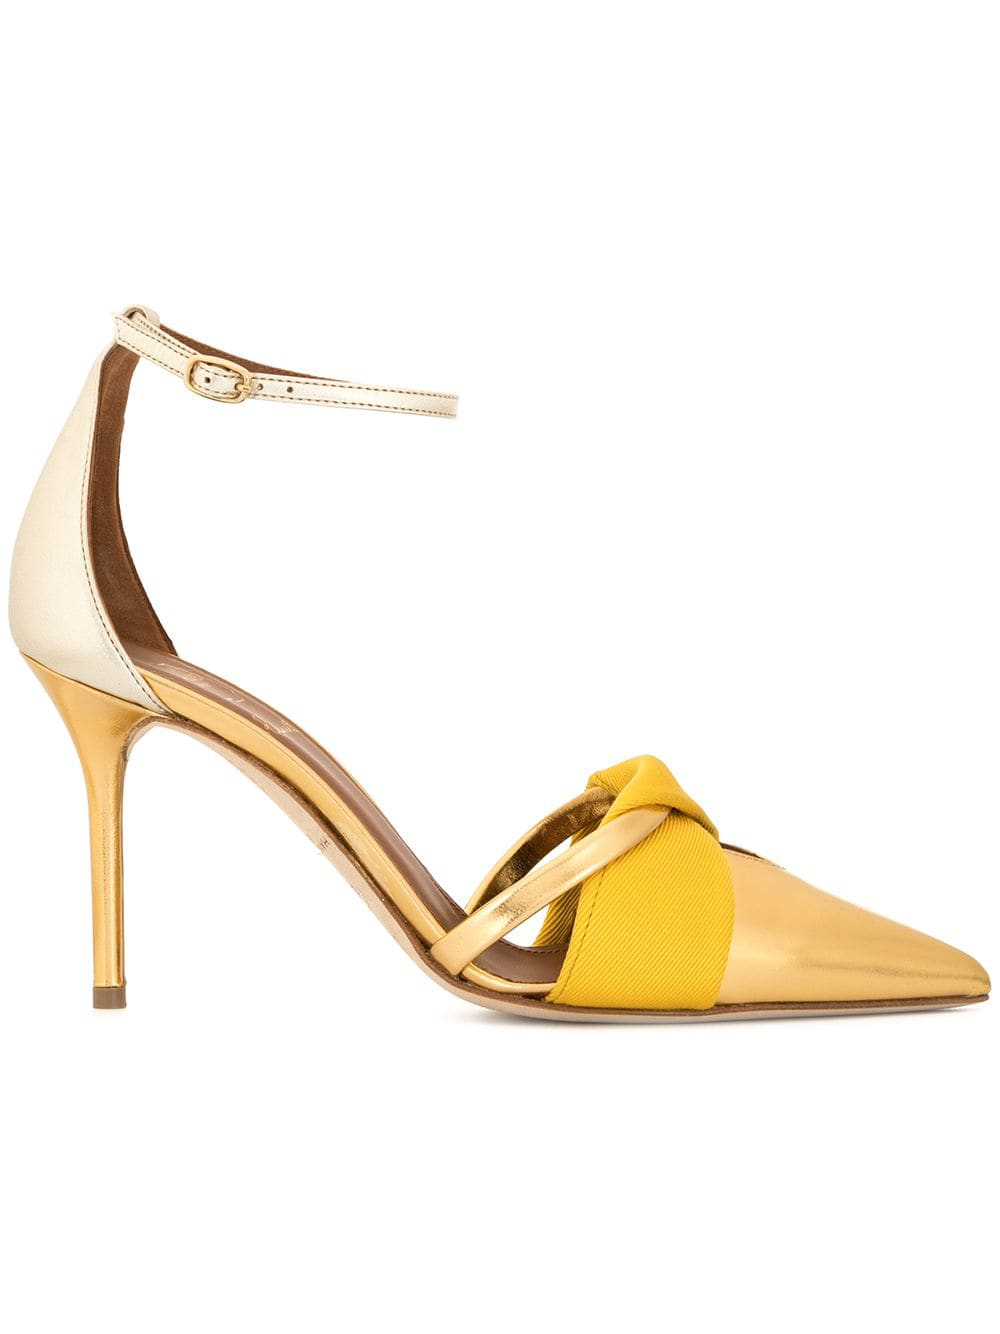 Malone Souliers Ankle Strap Pumps - Gold | ModeSens